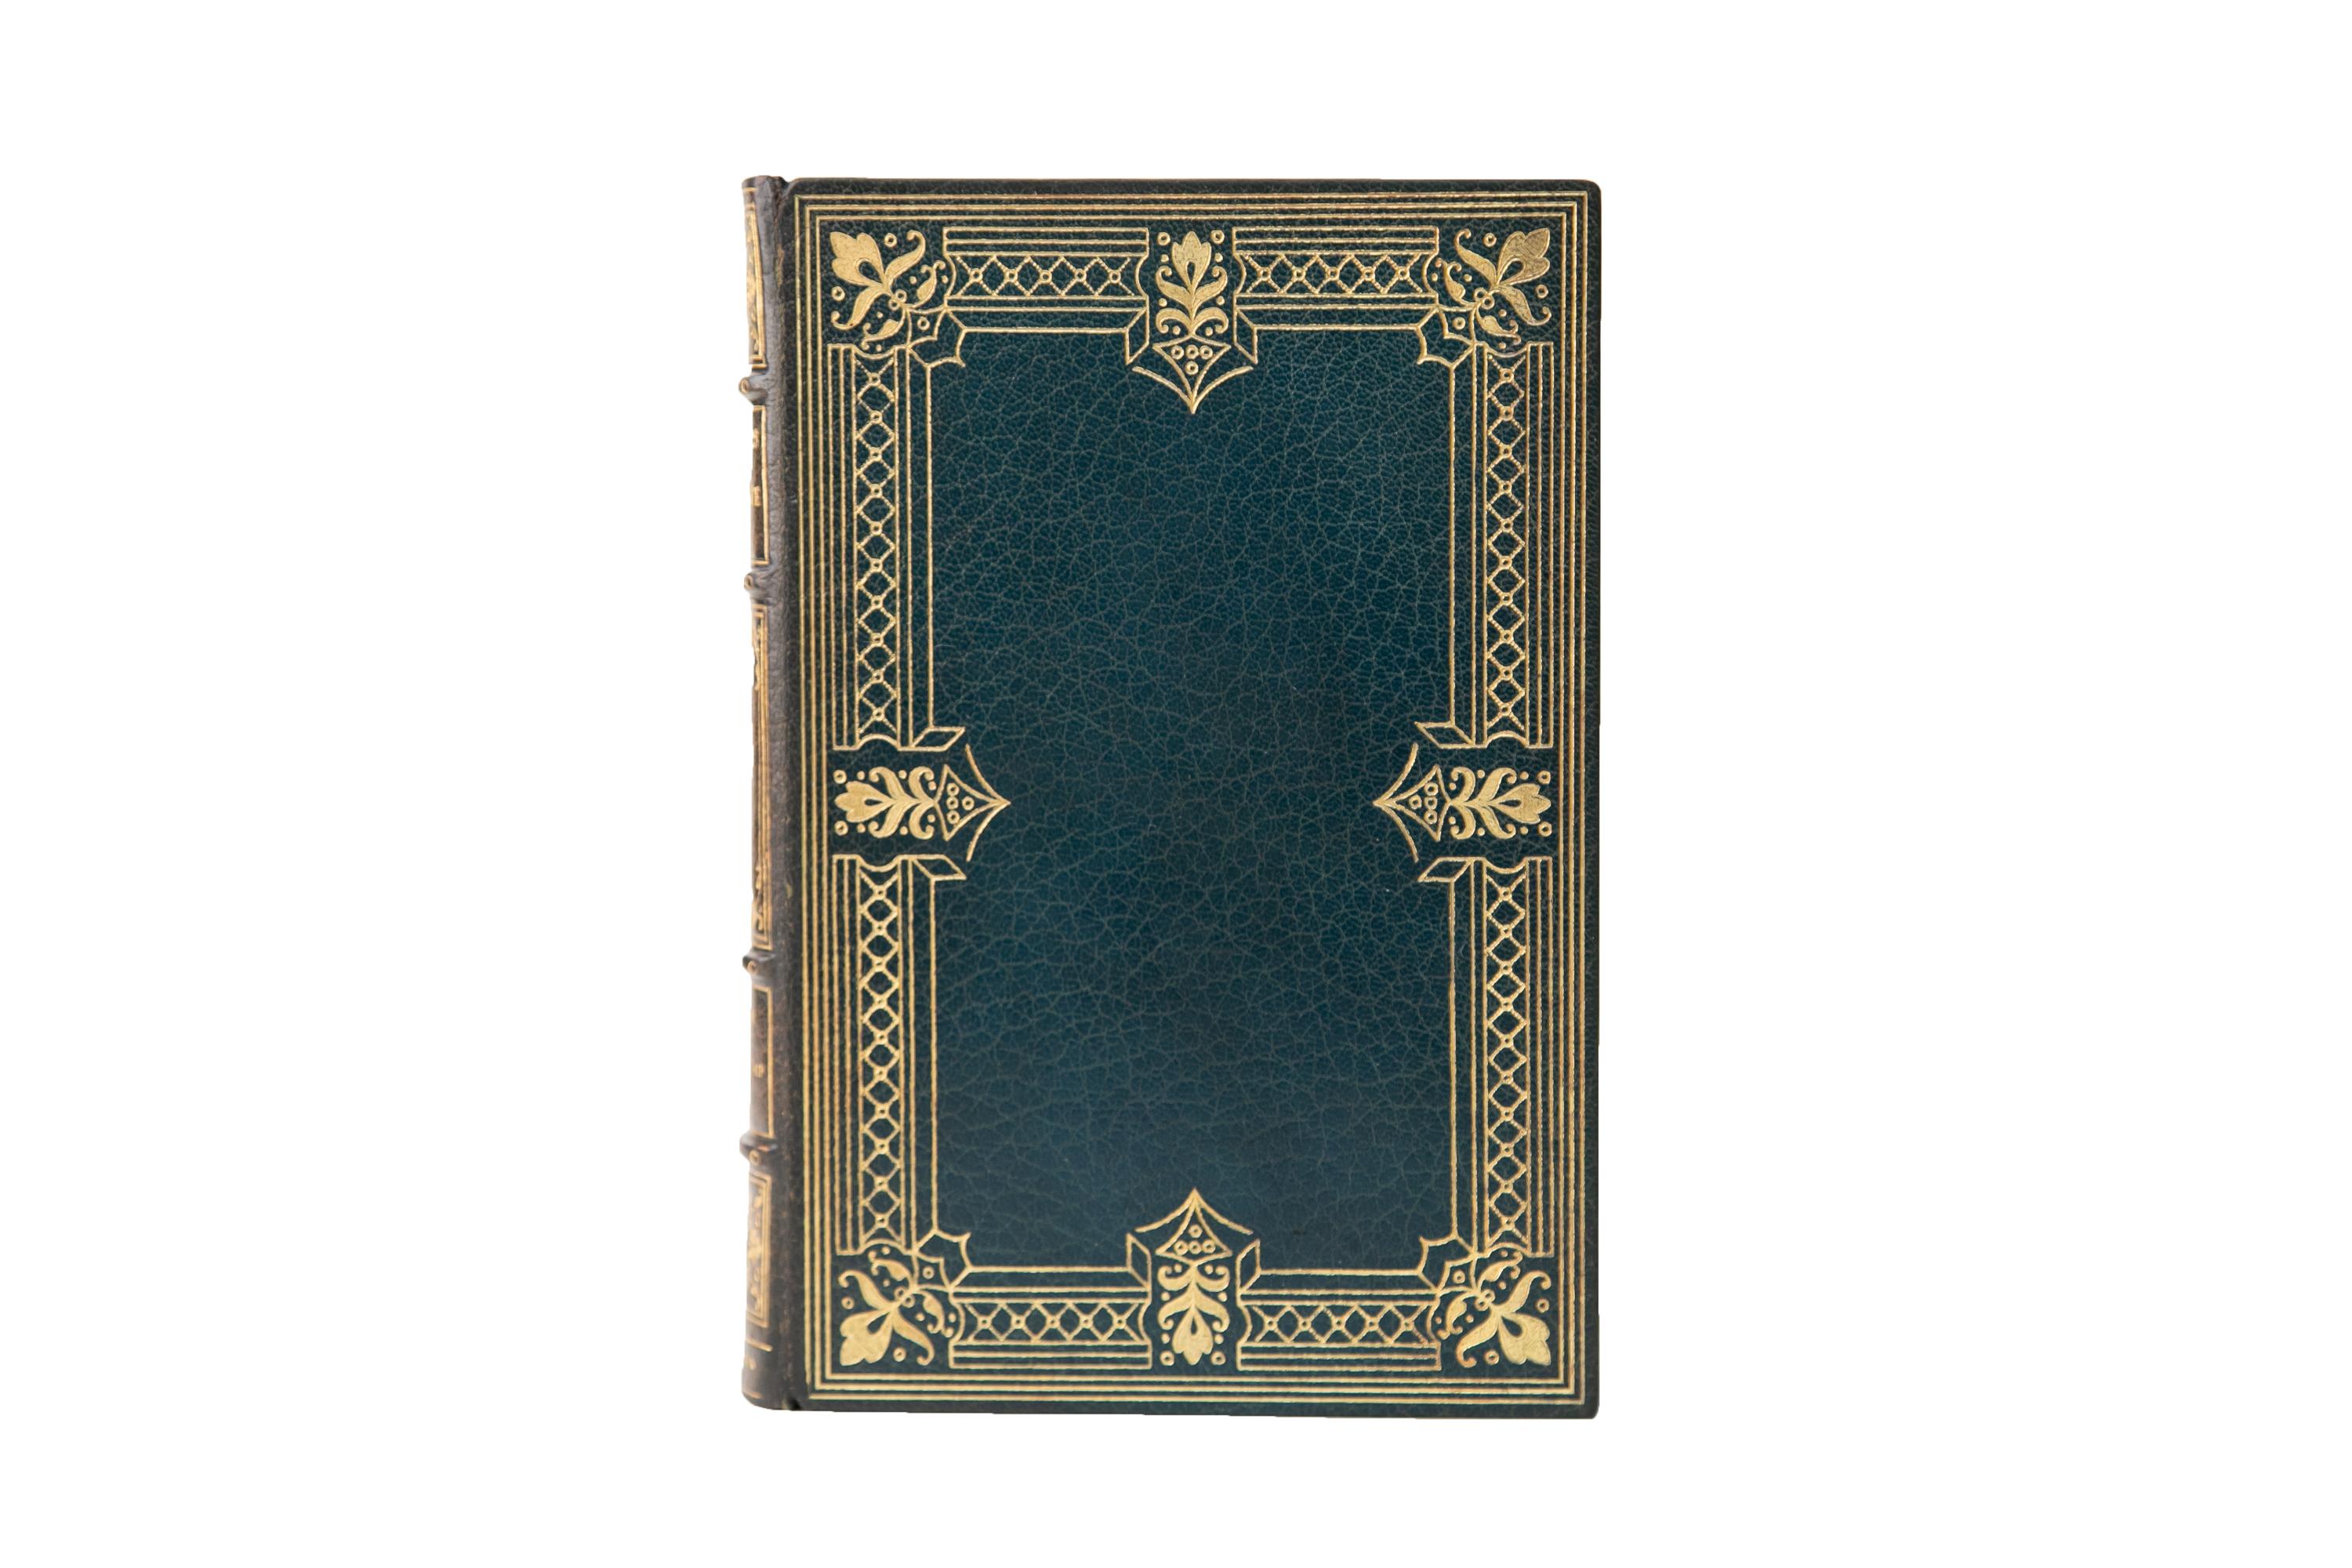 19 Volumes. Bret Harte, The Writings. Autograph Edition. Bound by Stikeman in full blue morocco with the covers displaying ornate gilt-tooled bordering with floral details. The spines display raised bands, floral details, bordering, and label